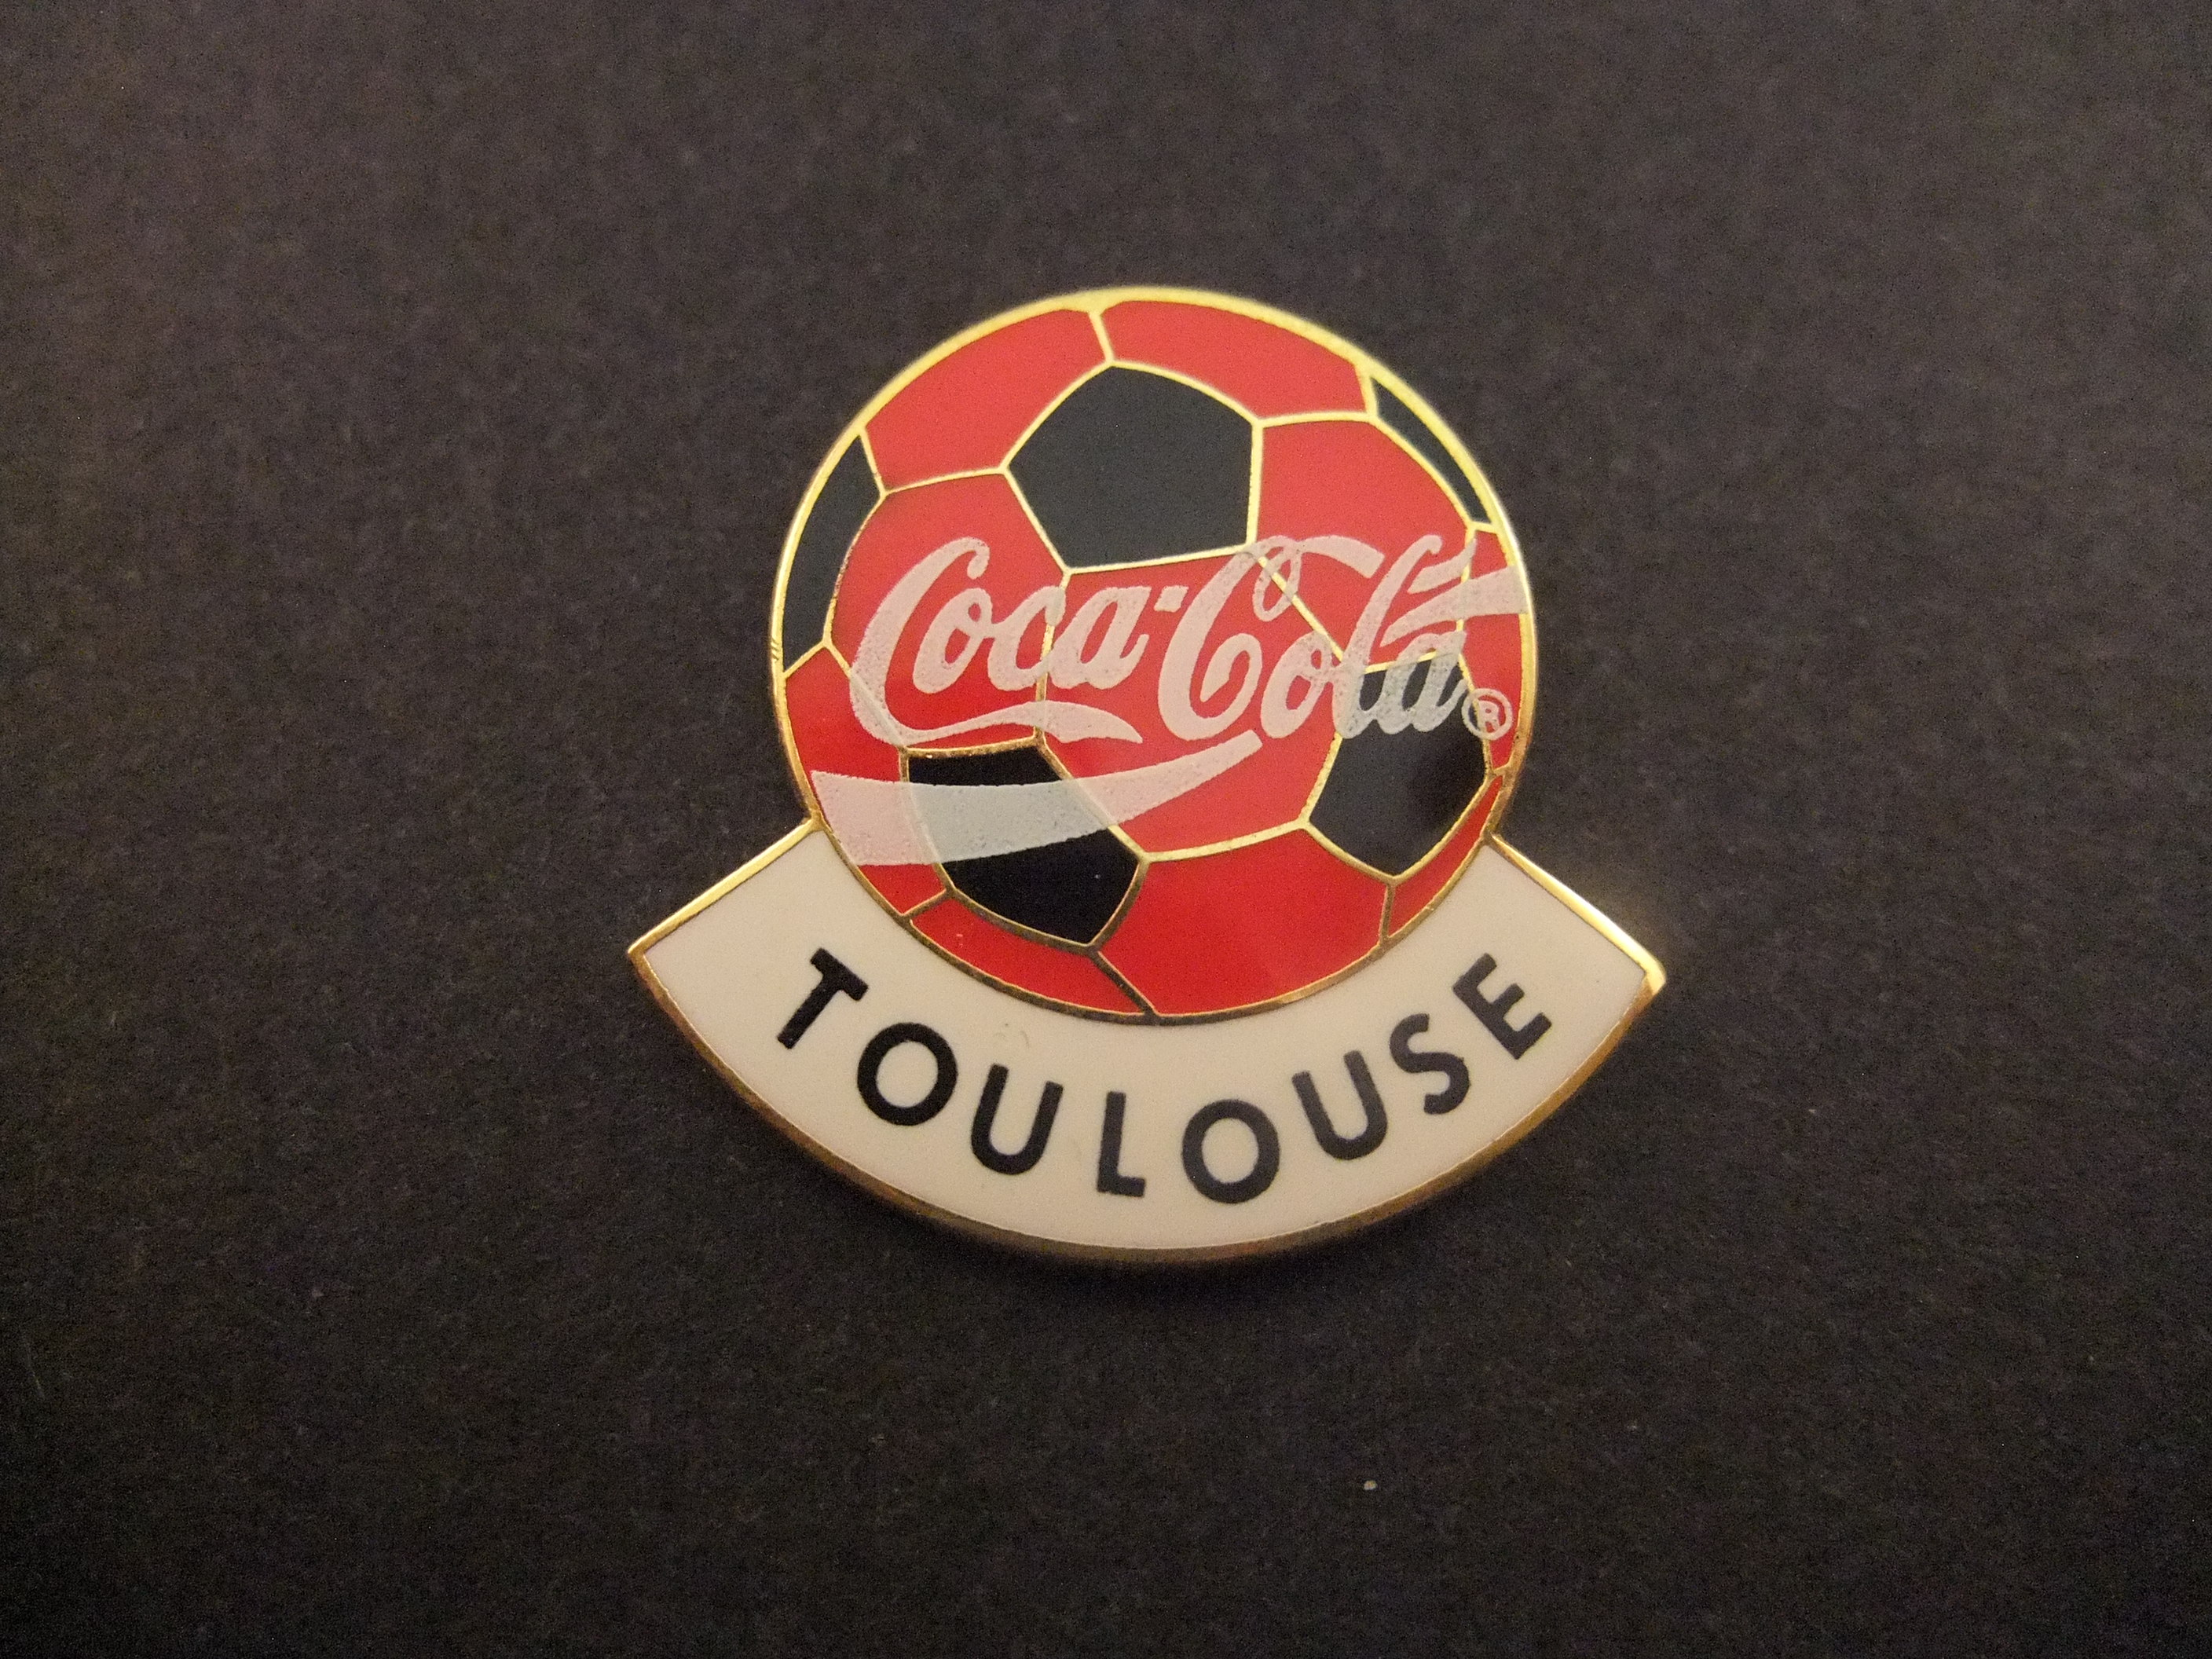 Coca Cola voetbal Toulouse